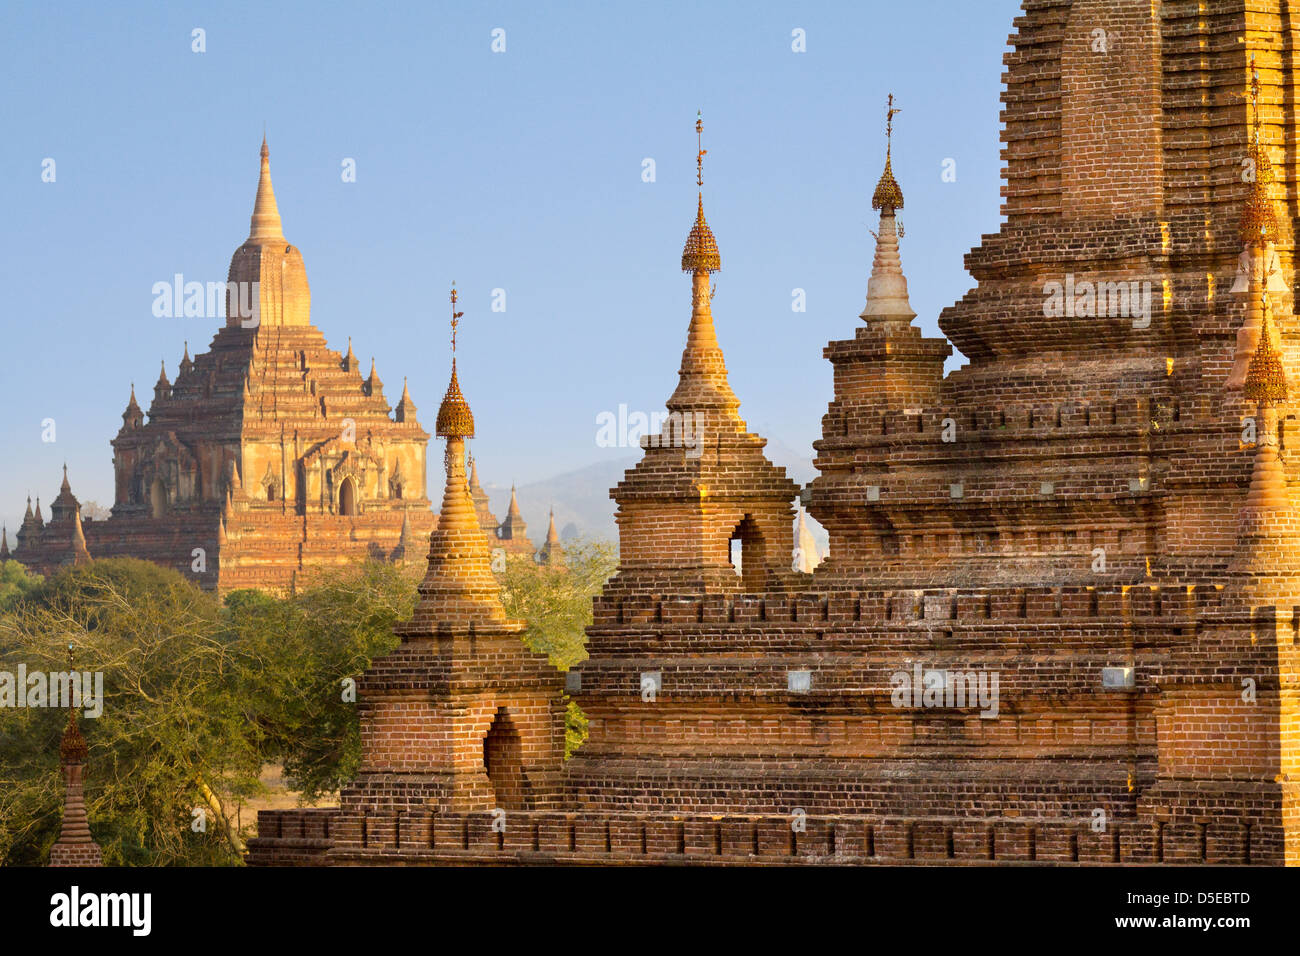 The Temples and Pagodas of Bagan, Myanmar - early morning 12 Stock Photo